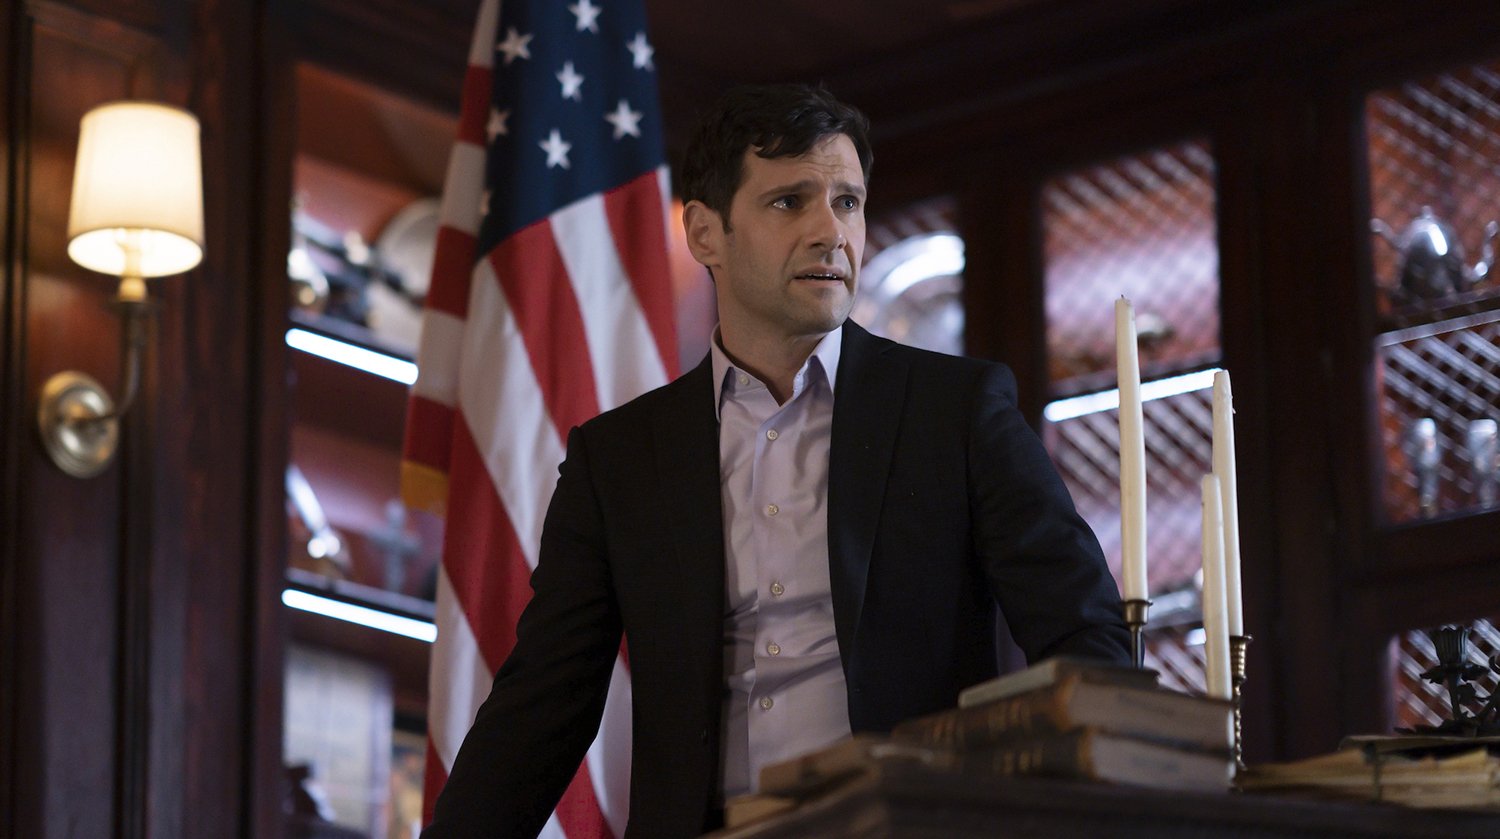 National Treasure: Edge of History star Justin Bartha as Riley Poole in a suit with a concerned expression